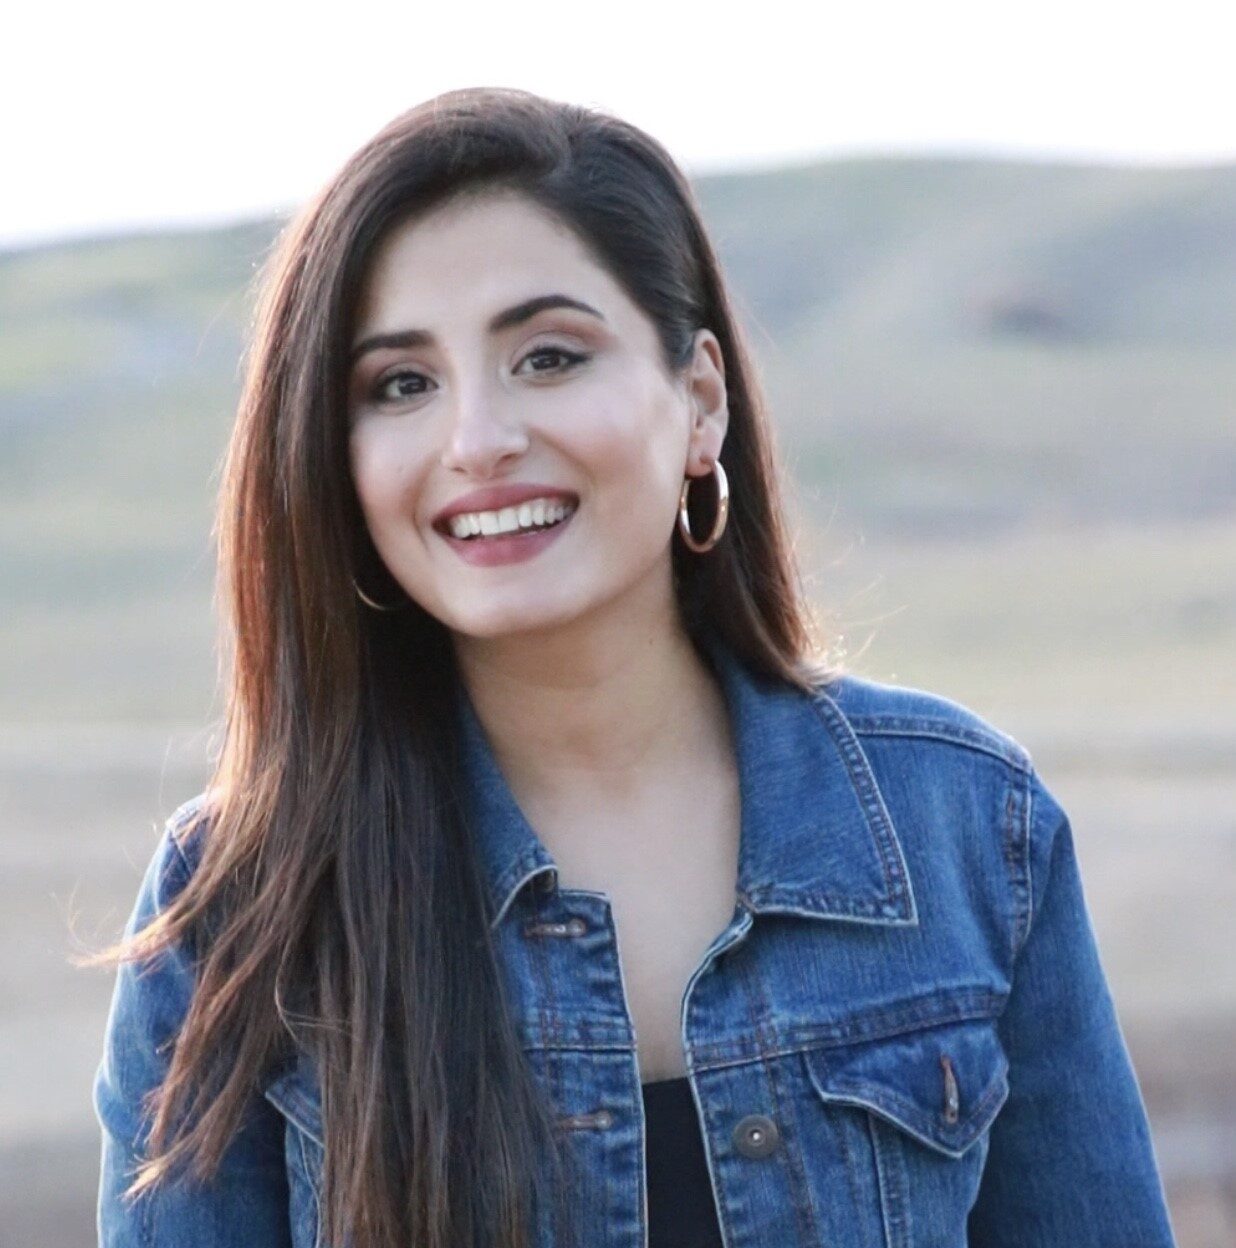 Sadaf wears a denim jacket and stands in front of a hilly background.